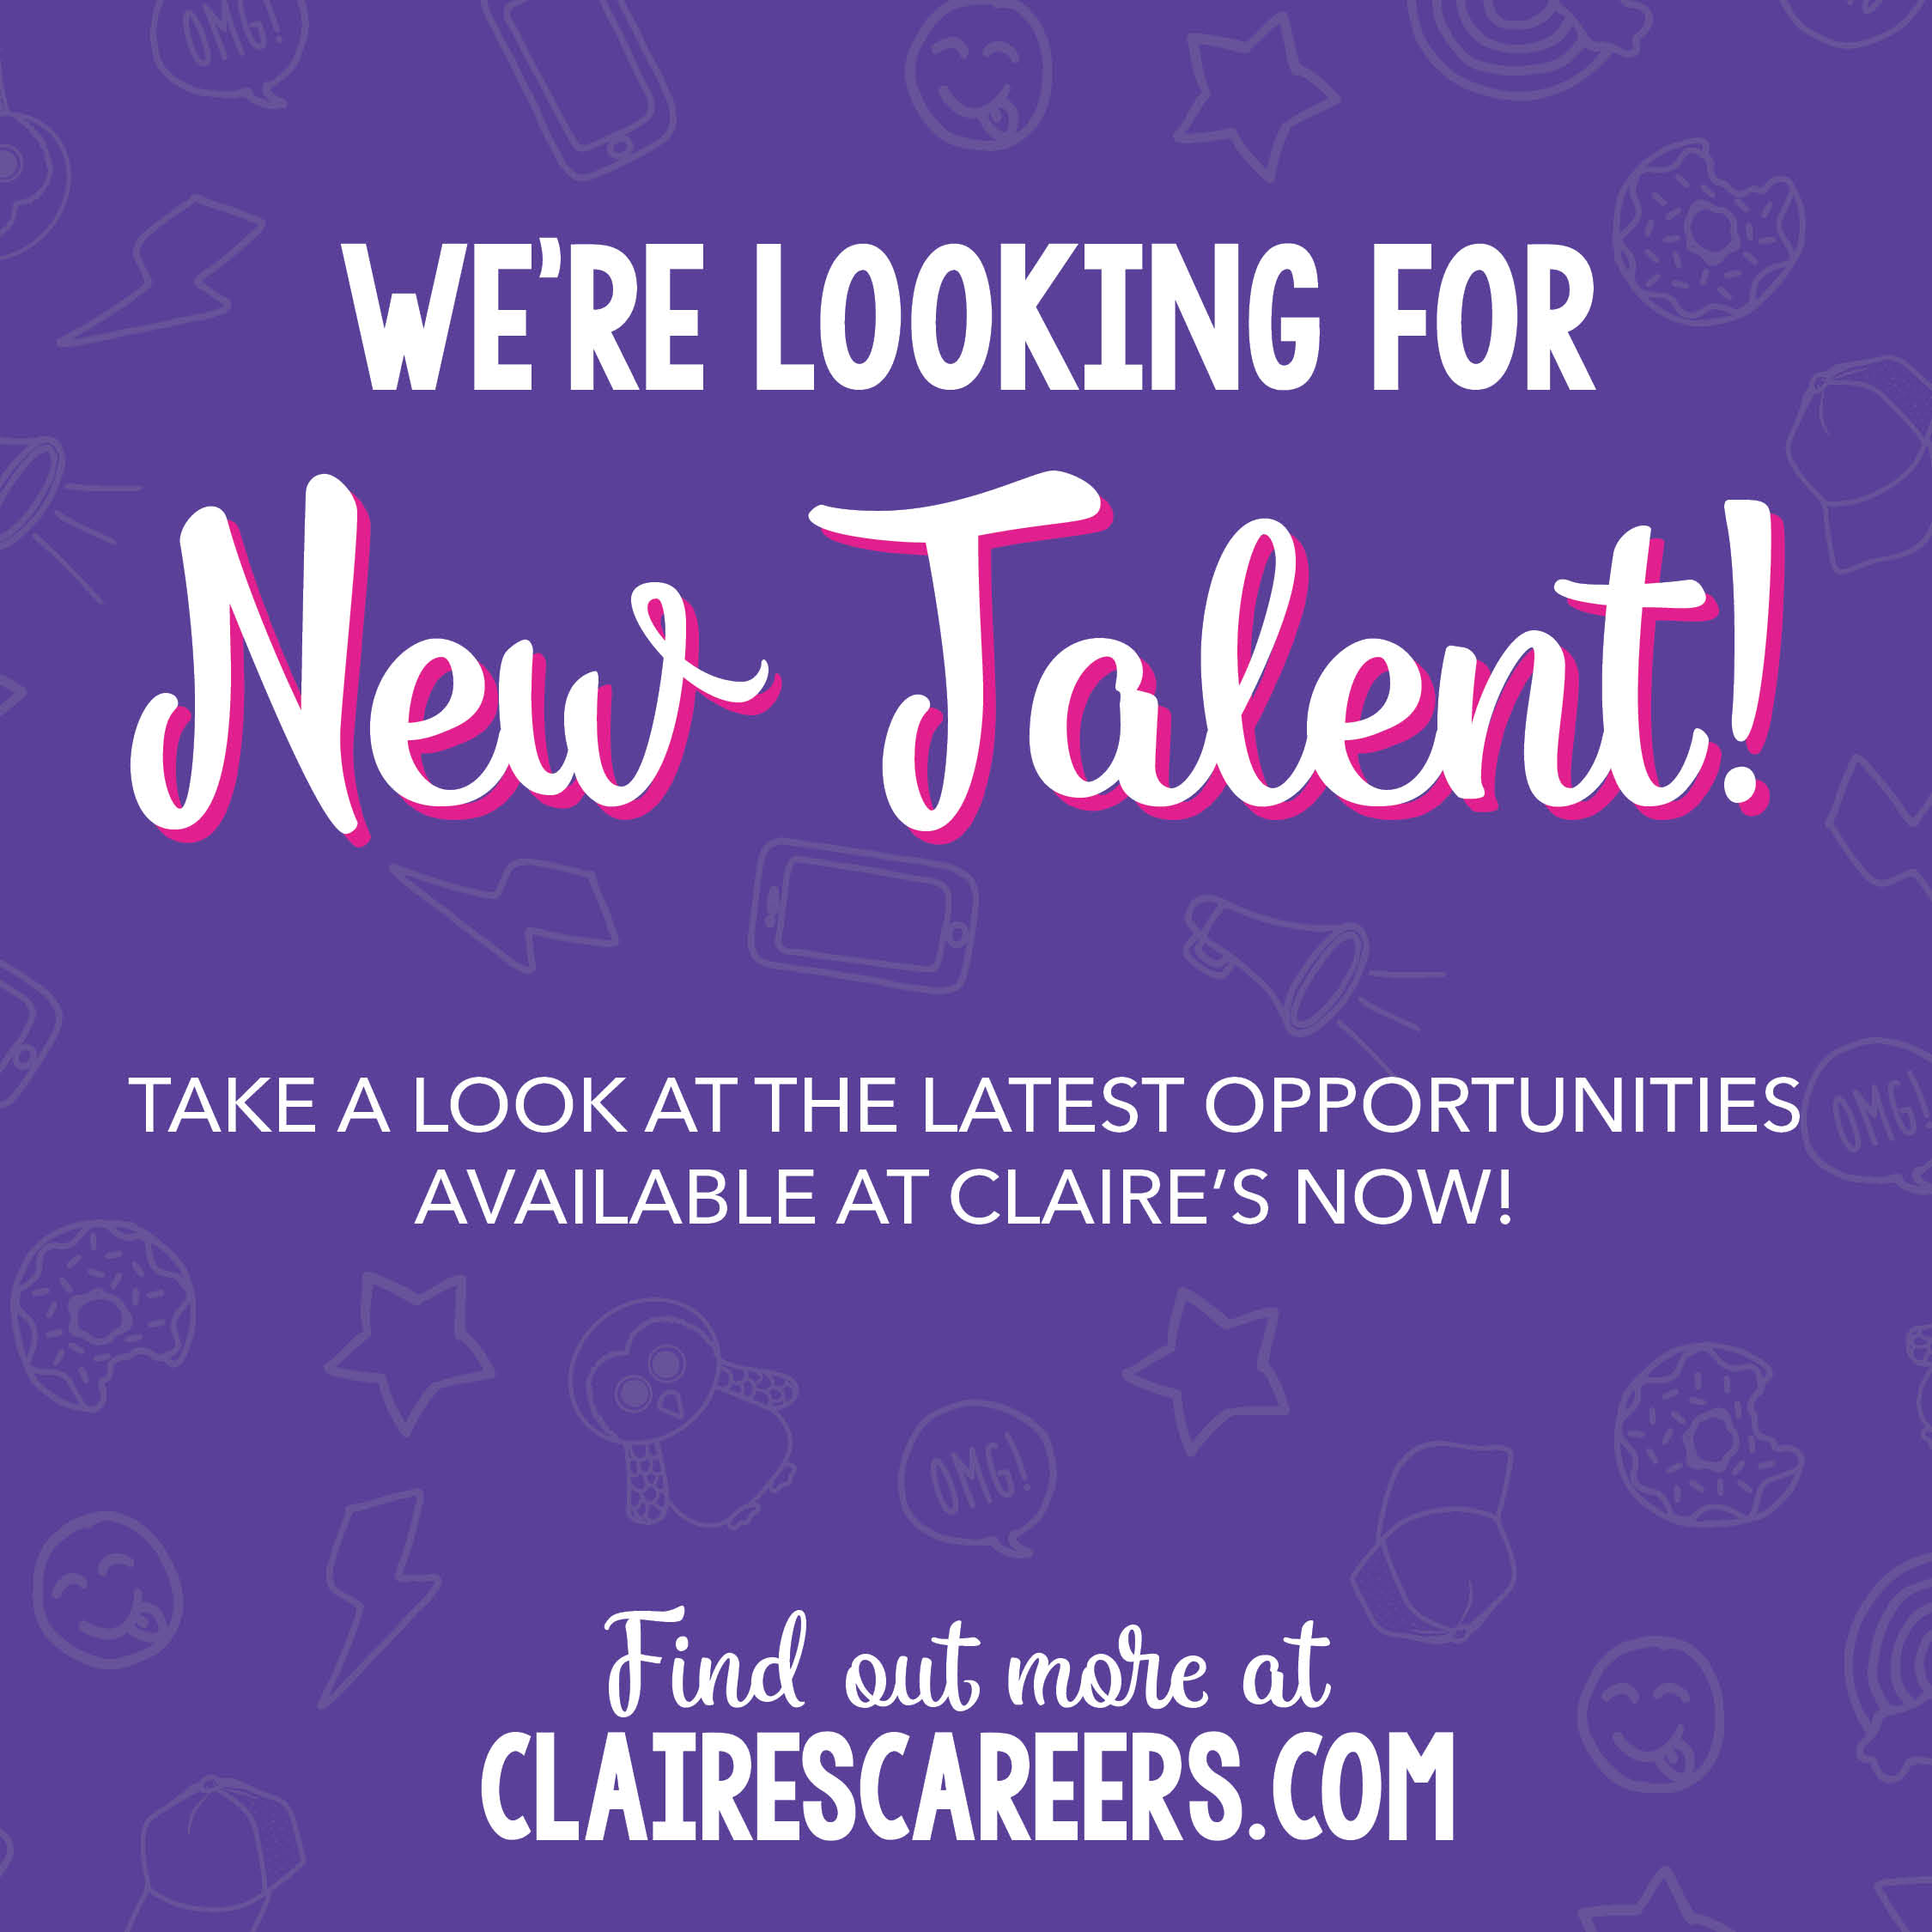 Claires careers.com